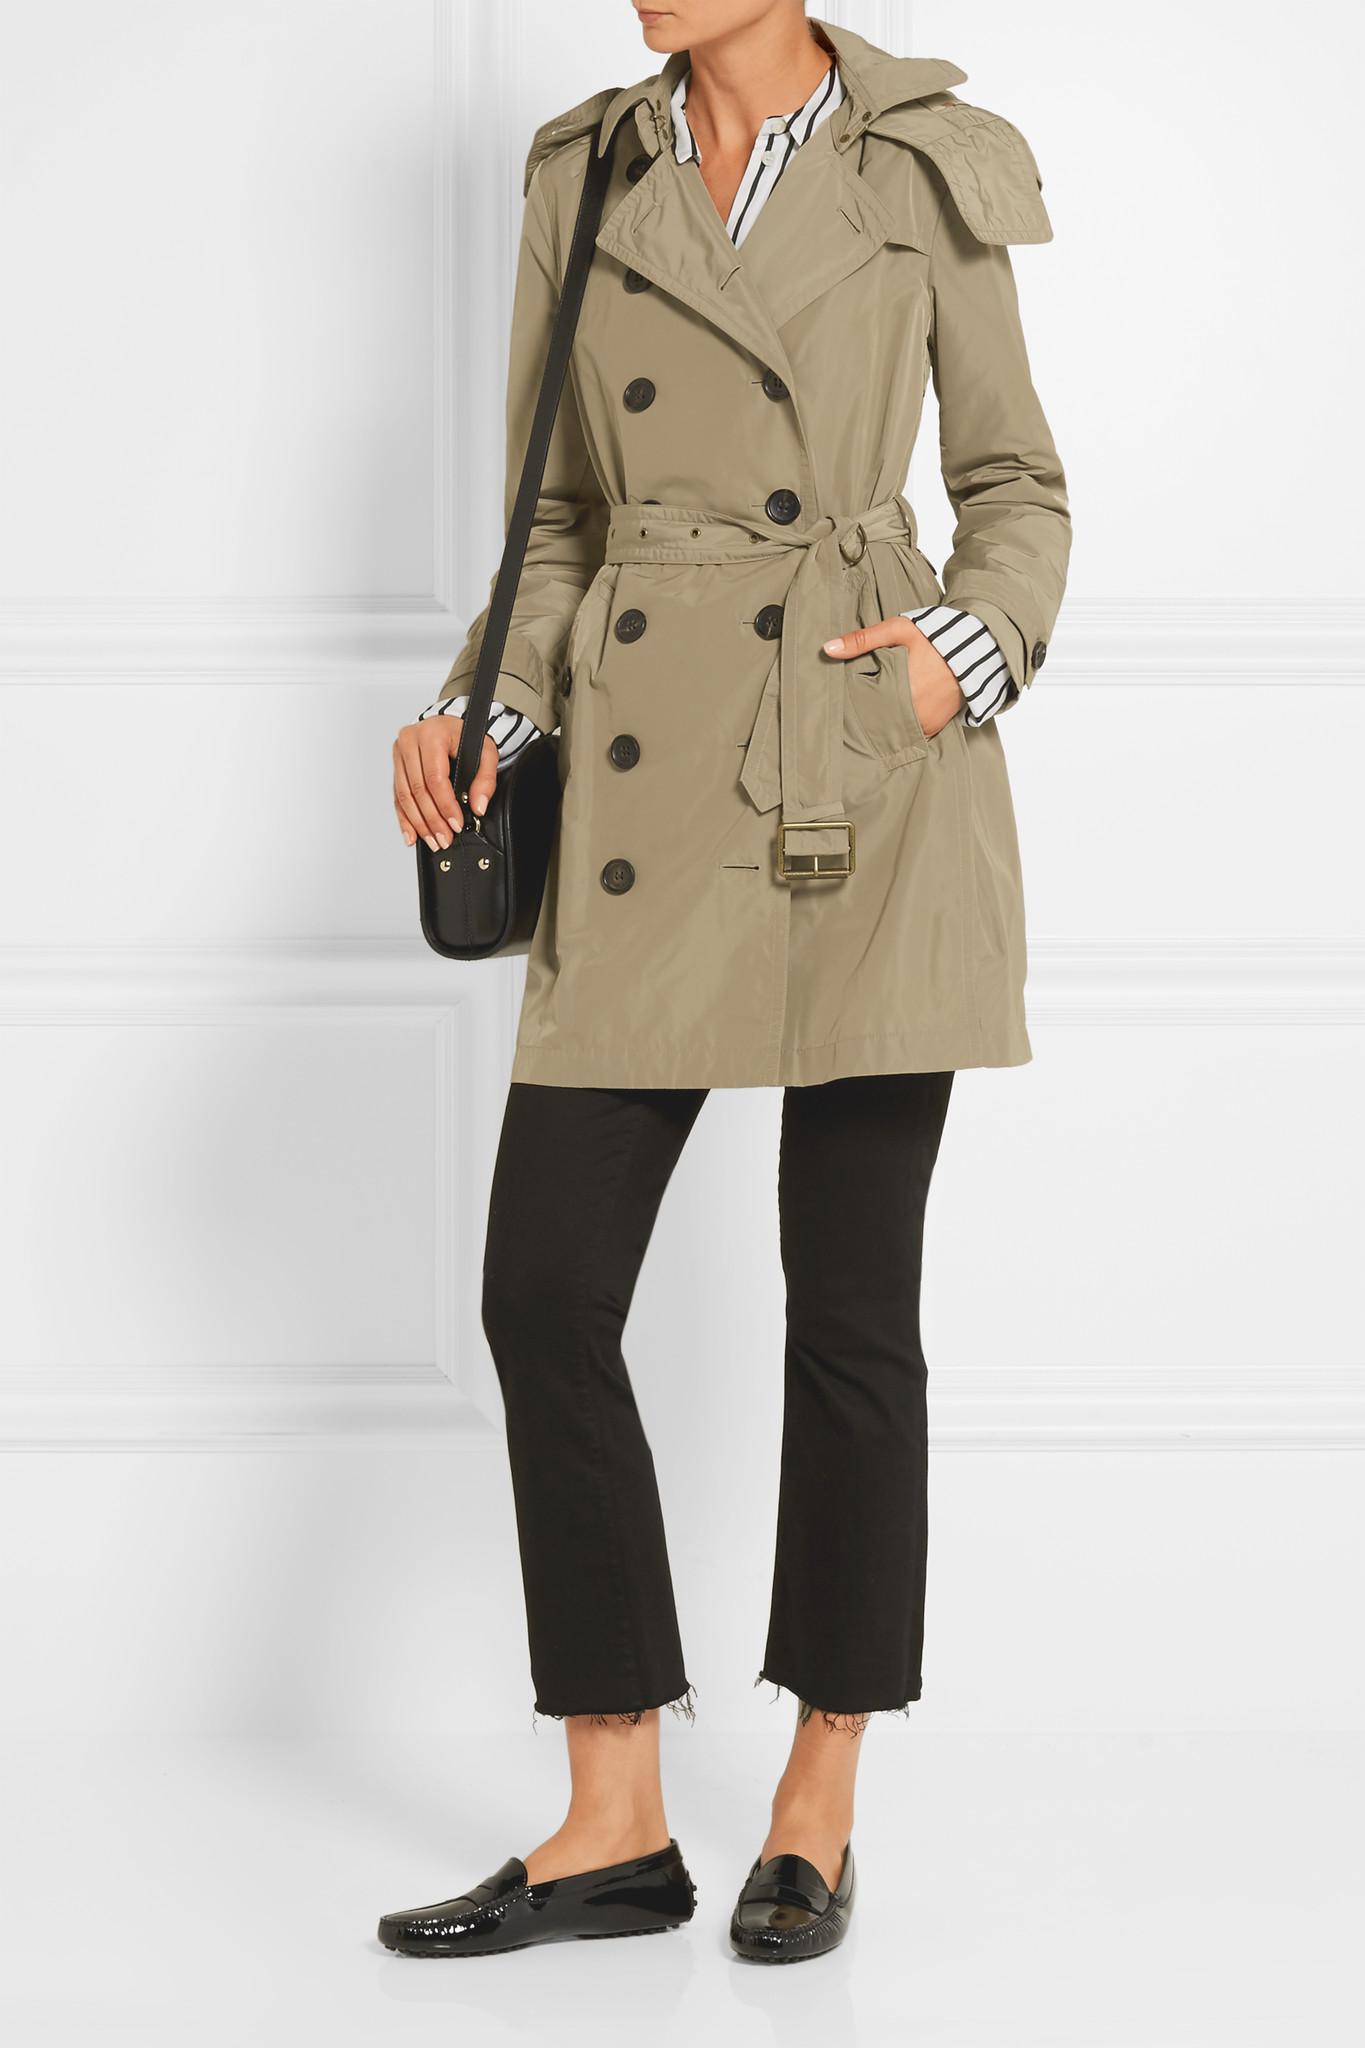 Lyst - Burberry Balmoral Packaway Hooded Shell Trench Coat